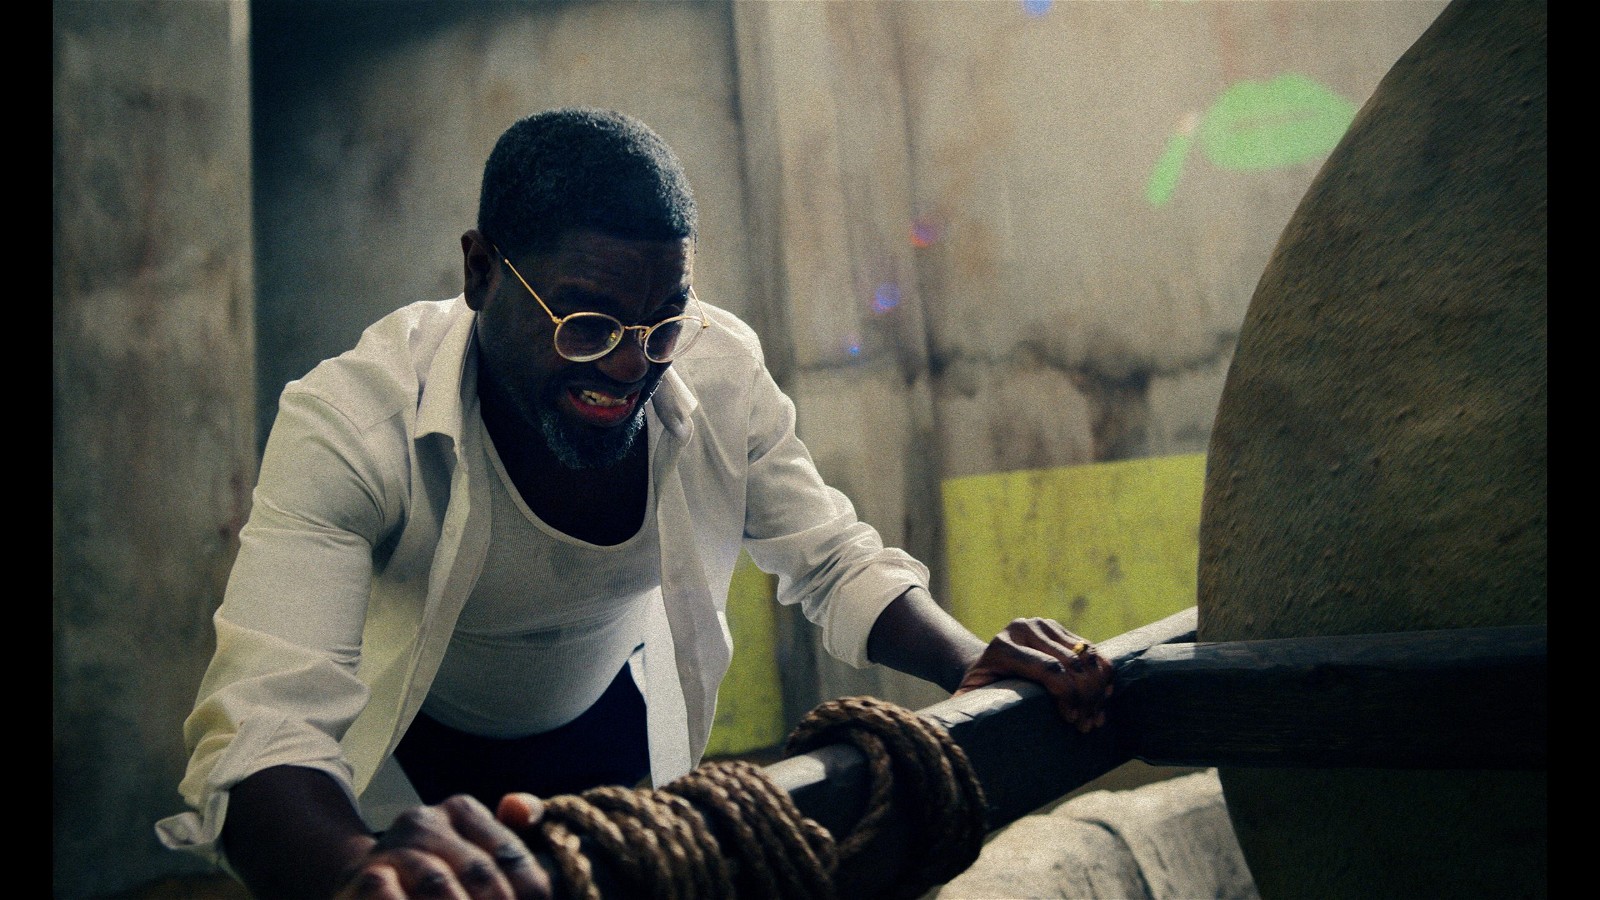 The Mill -- A businessman (Lil Rel Howery) wakes up beside an ancient grist mill situated in the center of an open-air prison cell with no idea how he got there. Forced to work as a beast of burden to stay alive, he must find a way to escape before the birth of his child. Joe Stevens (Lil Rel Howery), shown. (Photo: Courtesy of Hulu)